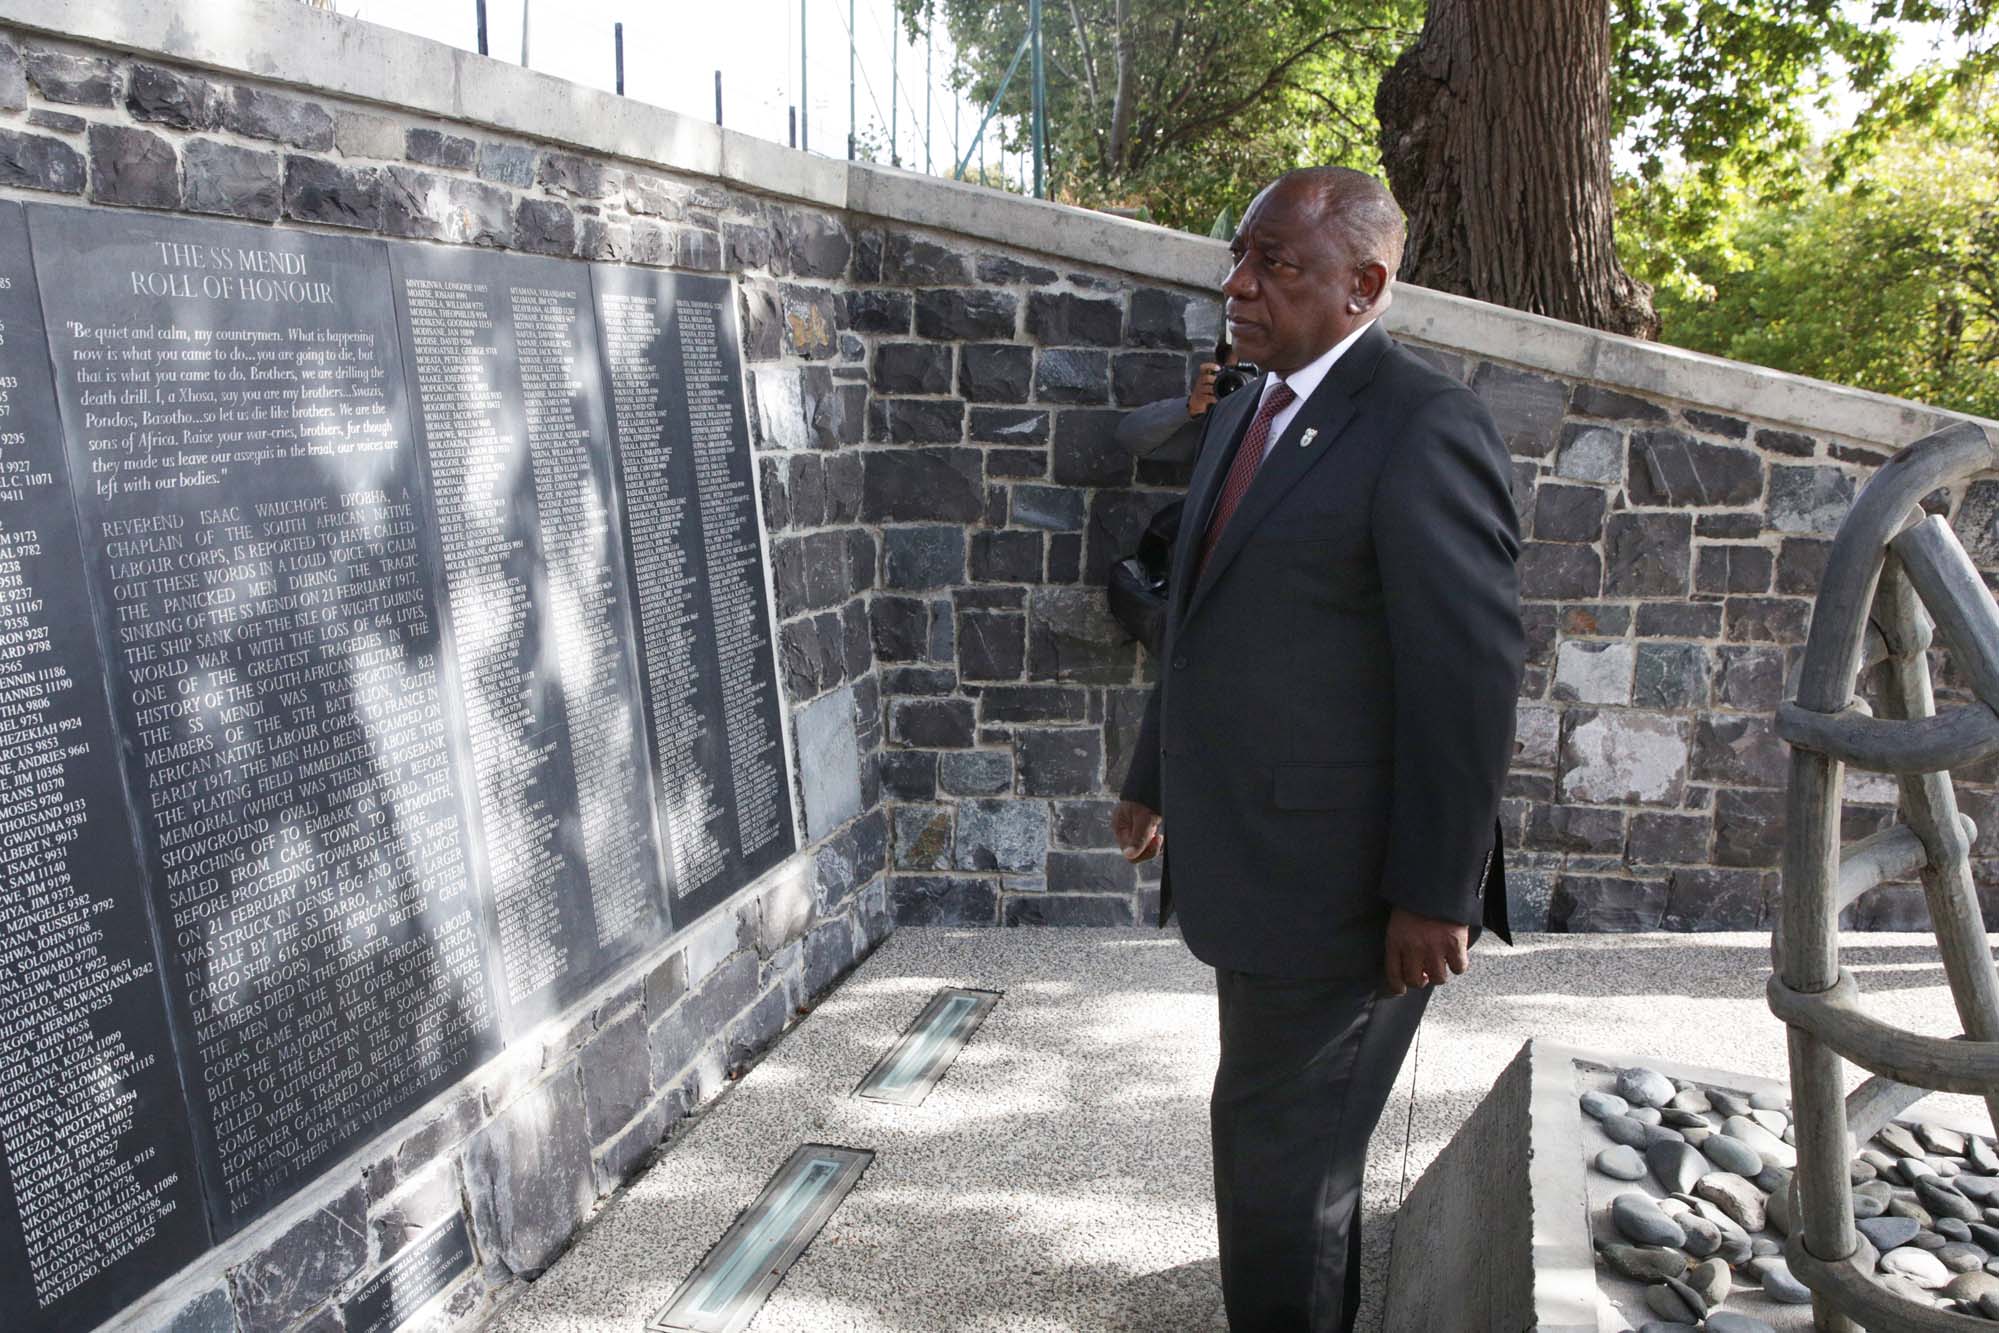 President Cyril Ramaphosa visited lower campus on 21 February to lay a wreath at the SS <i>Mendi</i> Memorial in honour of the South African soldiers who died when the ship sank in 1917.